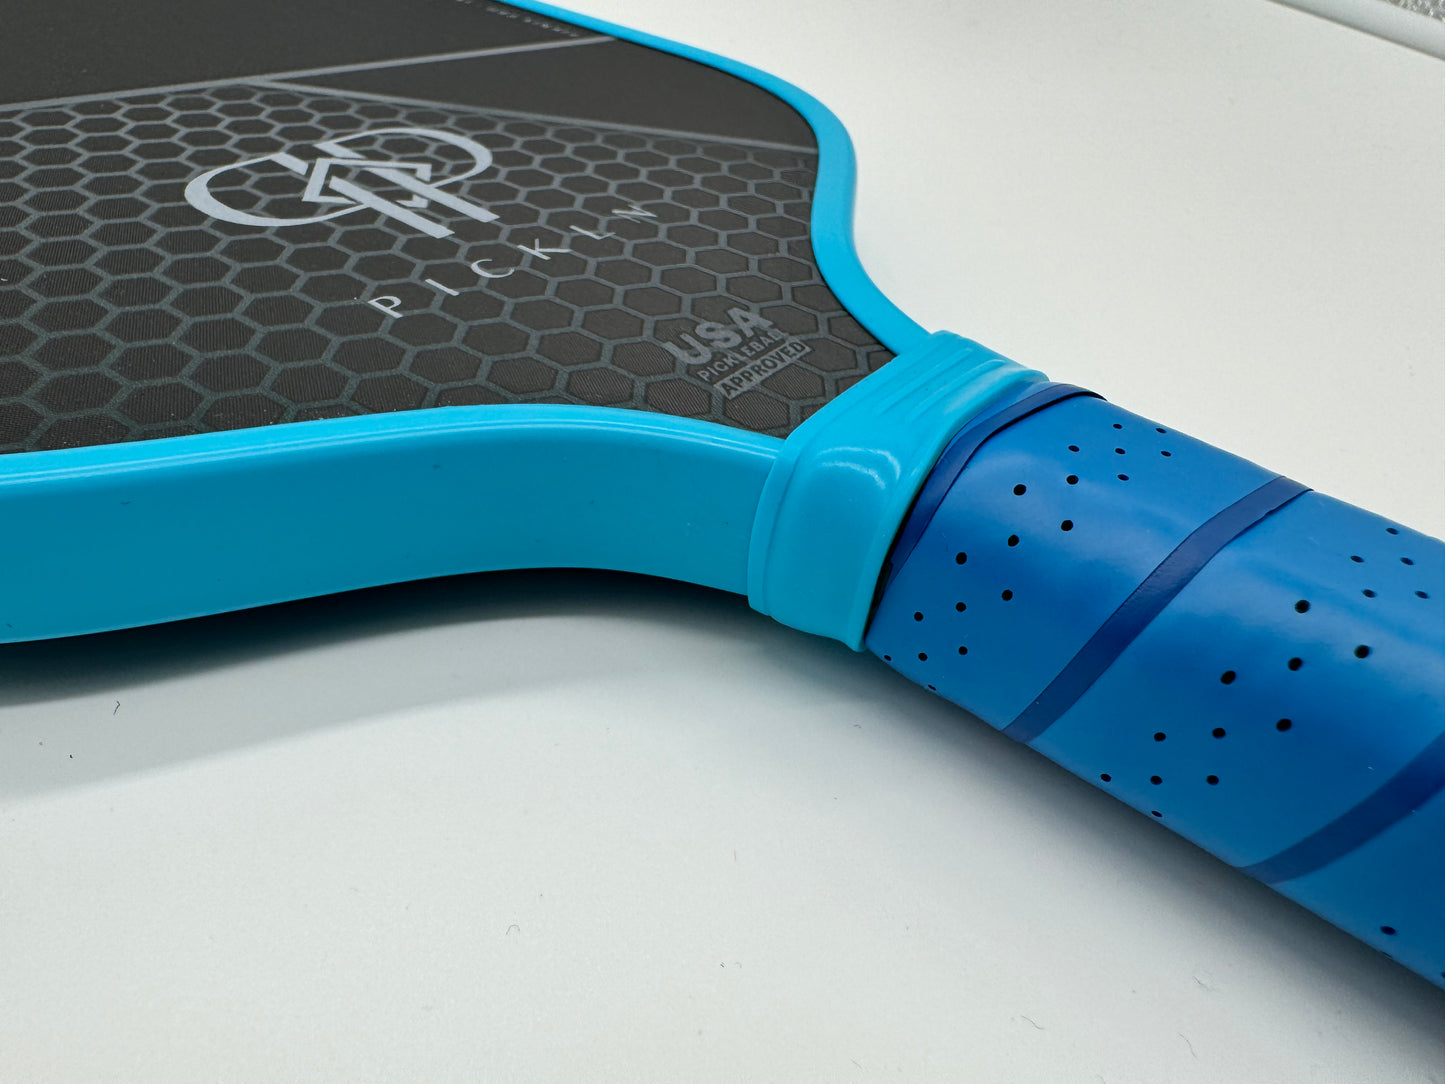 Piknix Pro: Thermoformed 16mm Carbon Fiber Pickleball Paddle